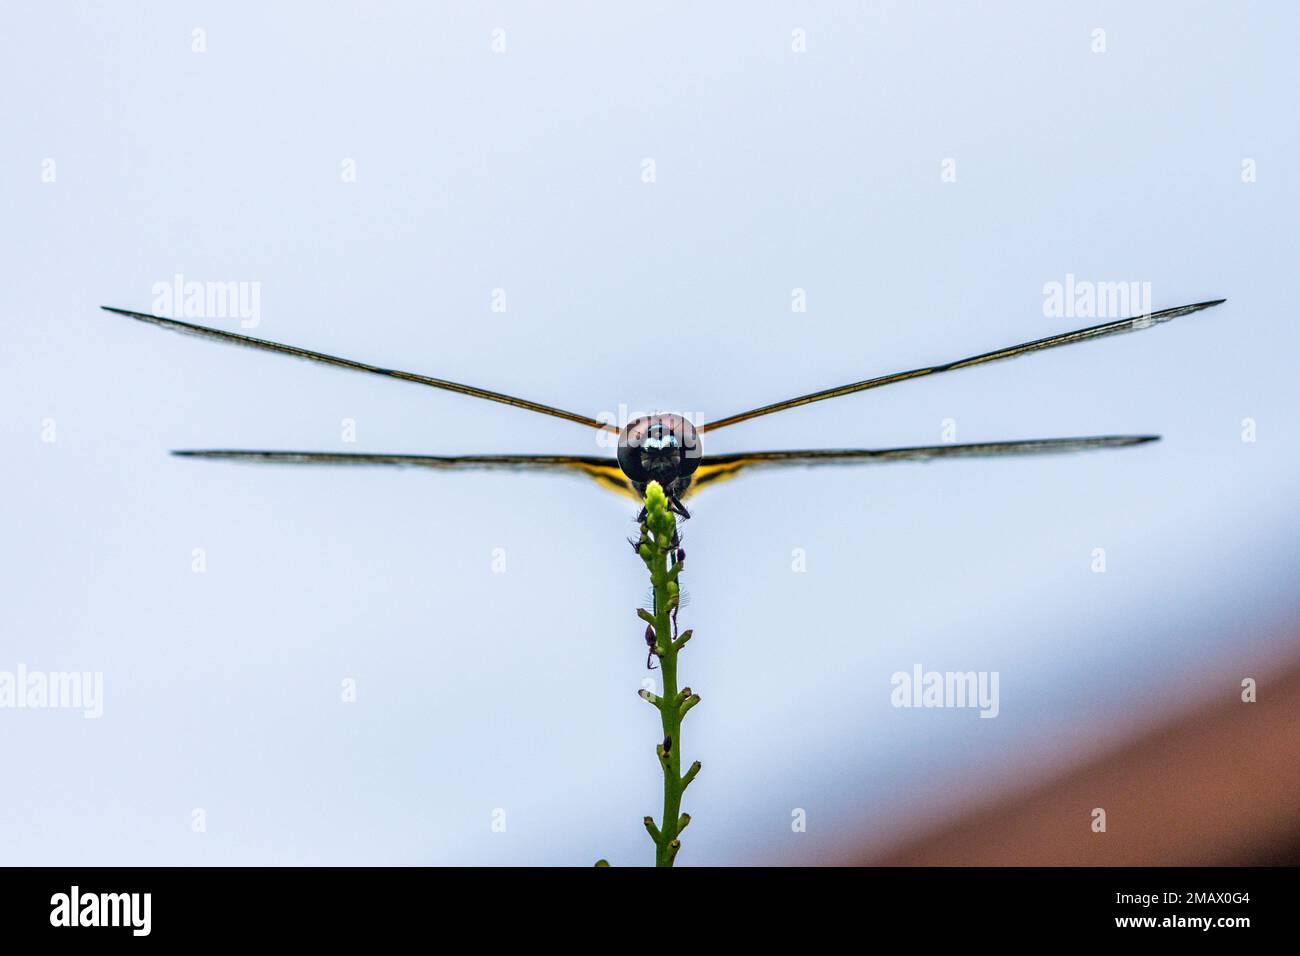 A dragonfly perched on a tree branch and nature background, Selective focus, insect macro, Colorful insect in Thailand. Stock Photo